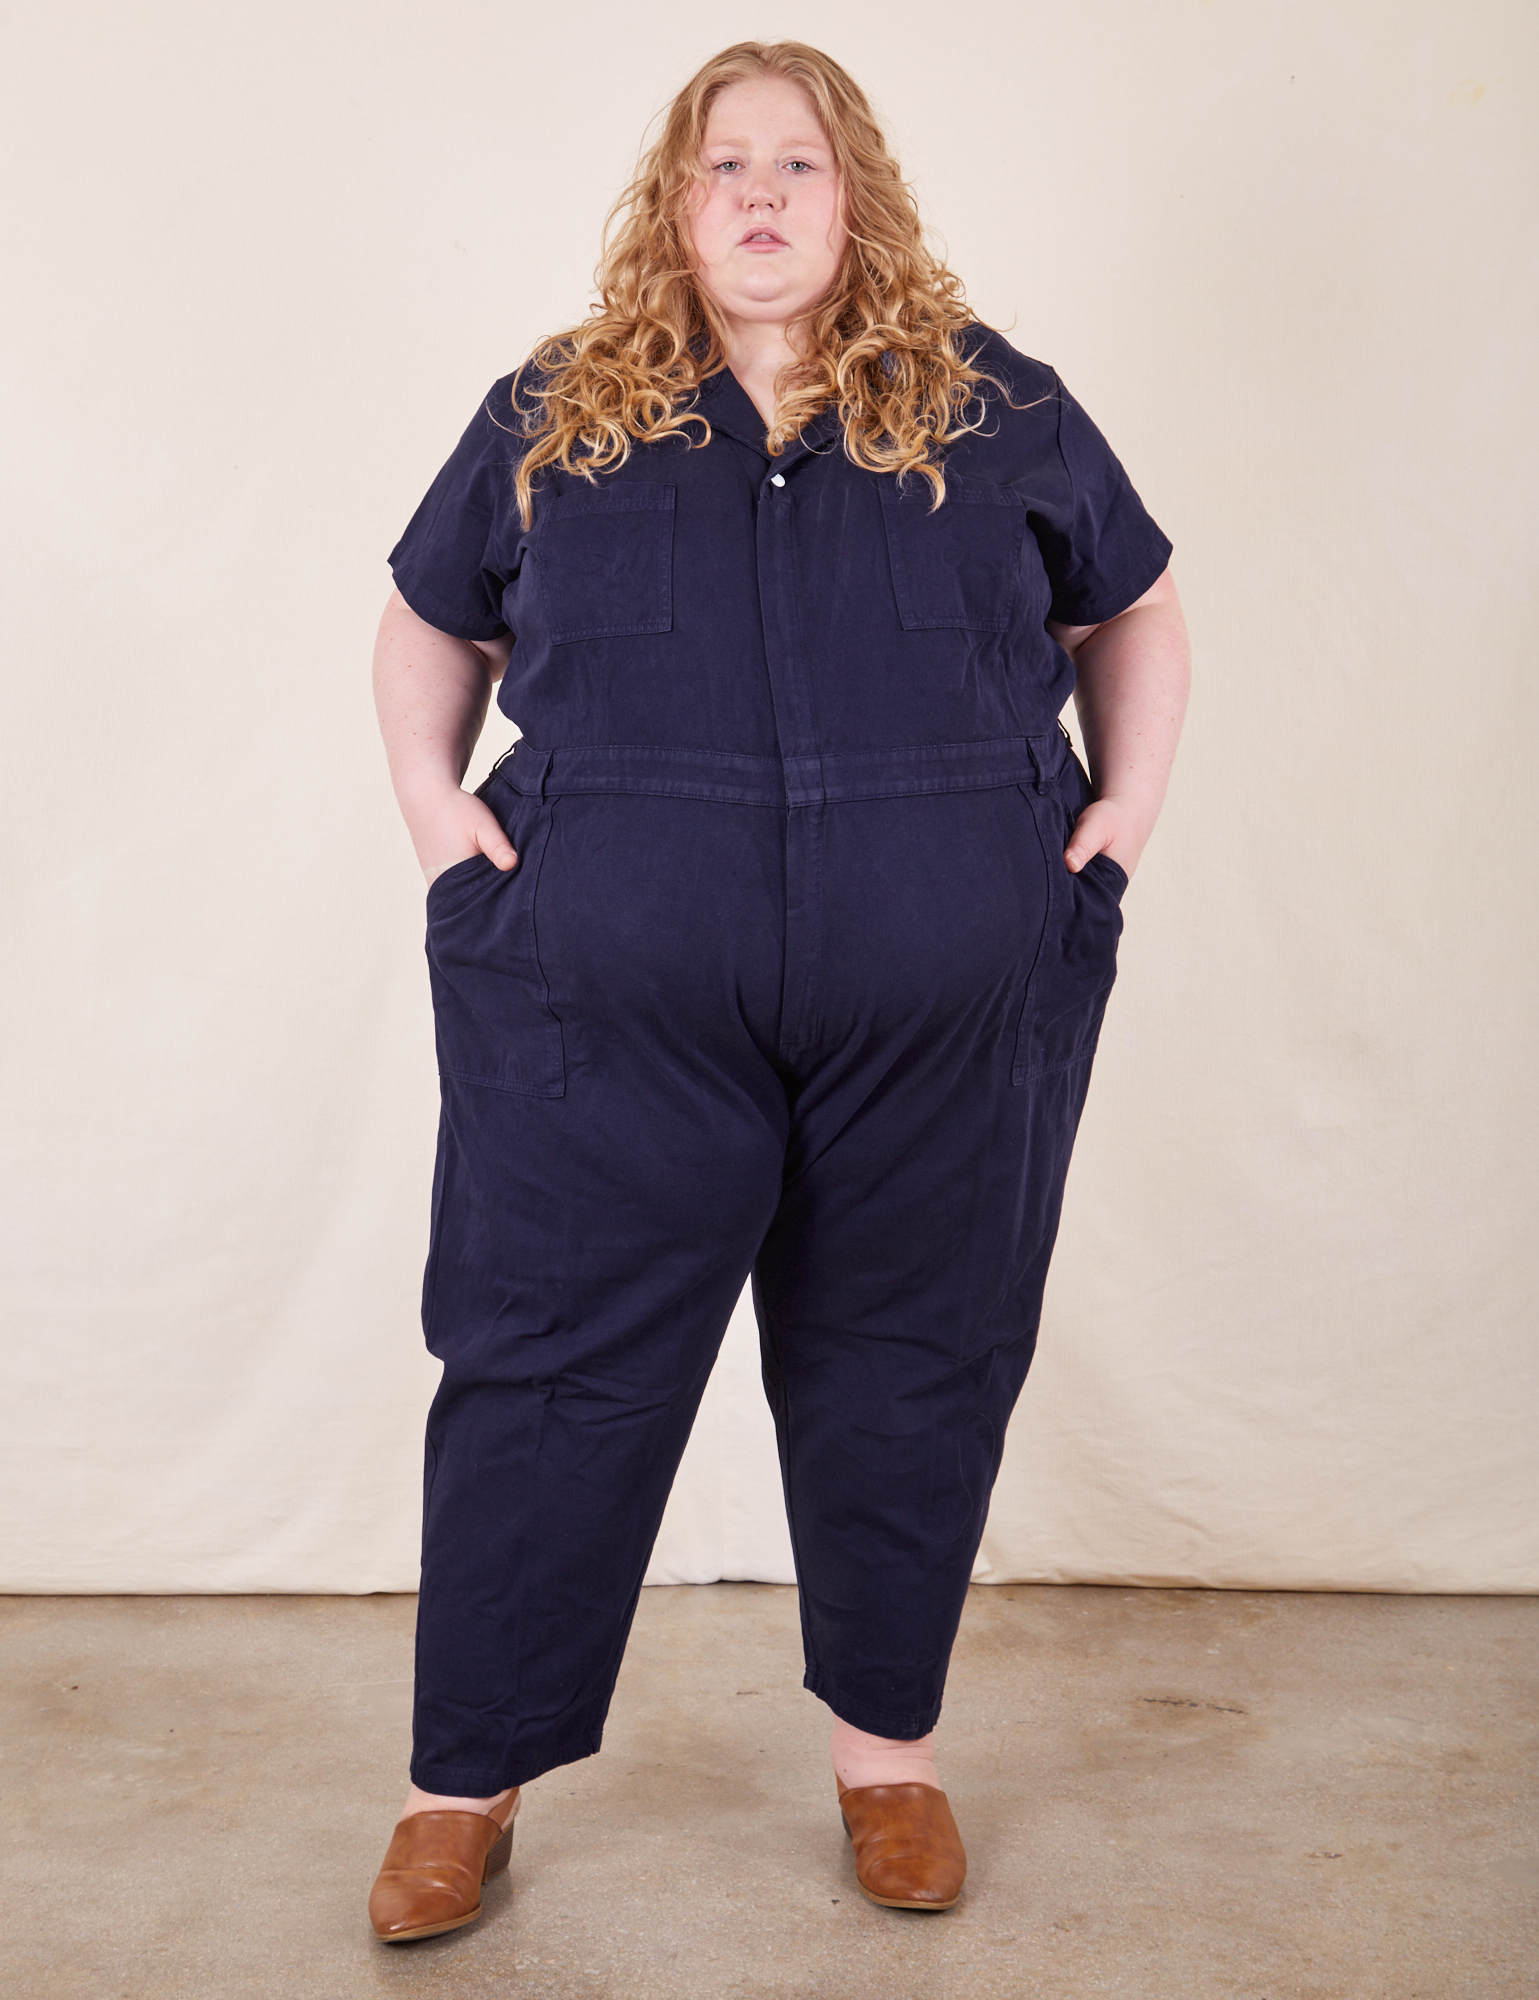 Catie is 5&#39;11&quot; and wearing 5XL Short Sleeve Jumpsuit in Navy Blue